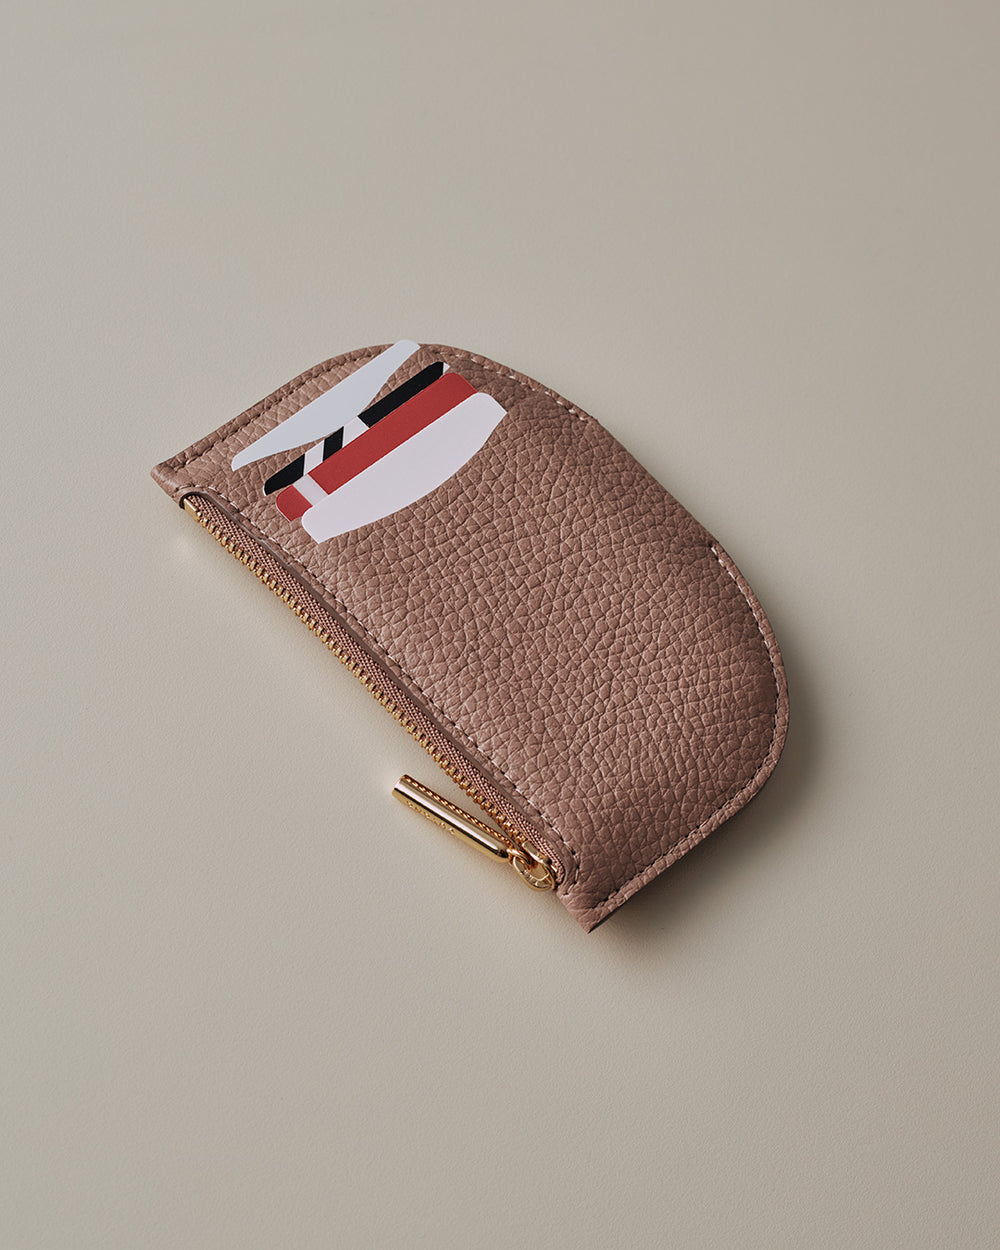 Wallet with zipper partially open showing cards inside.